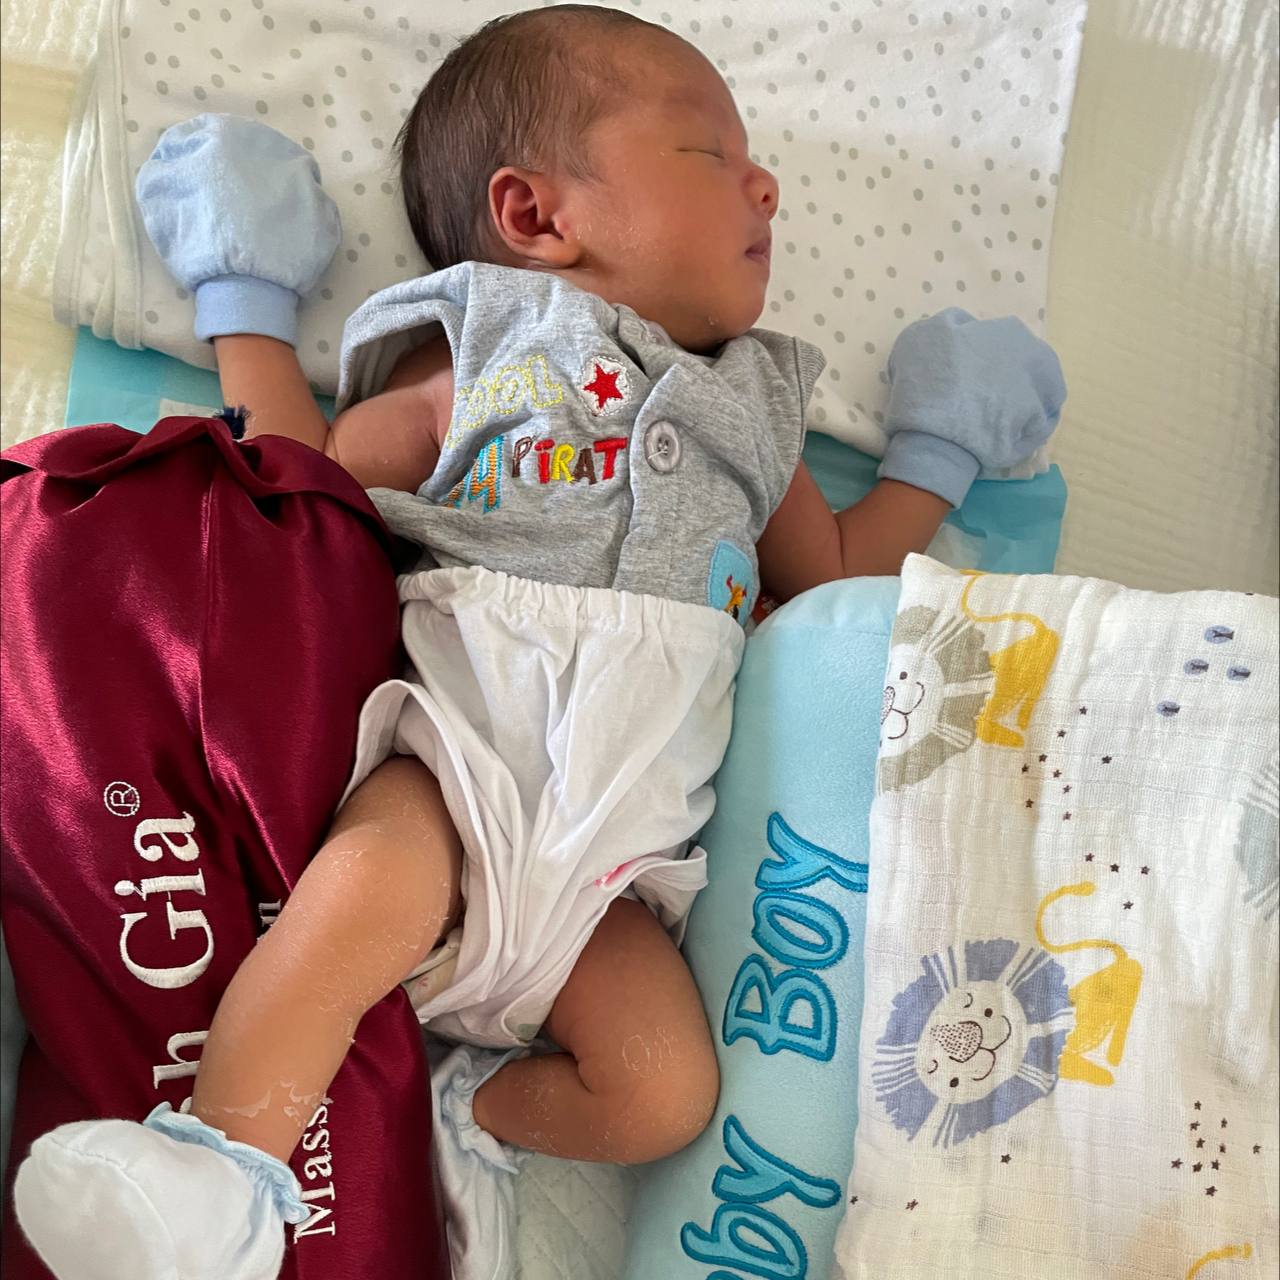 Mit's arrival (Delivery story and 1 week postpartum)